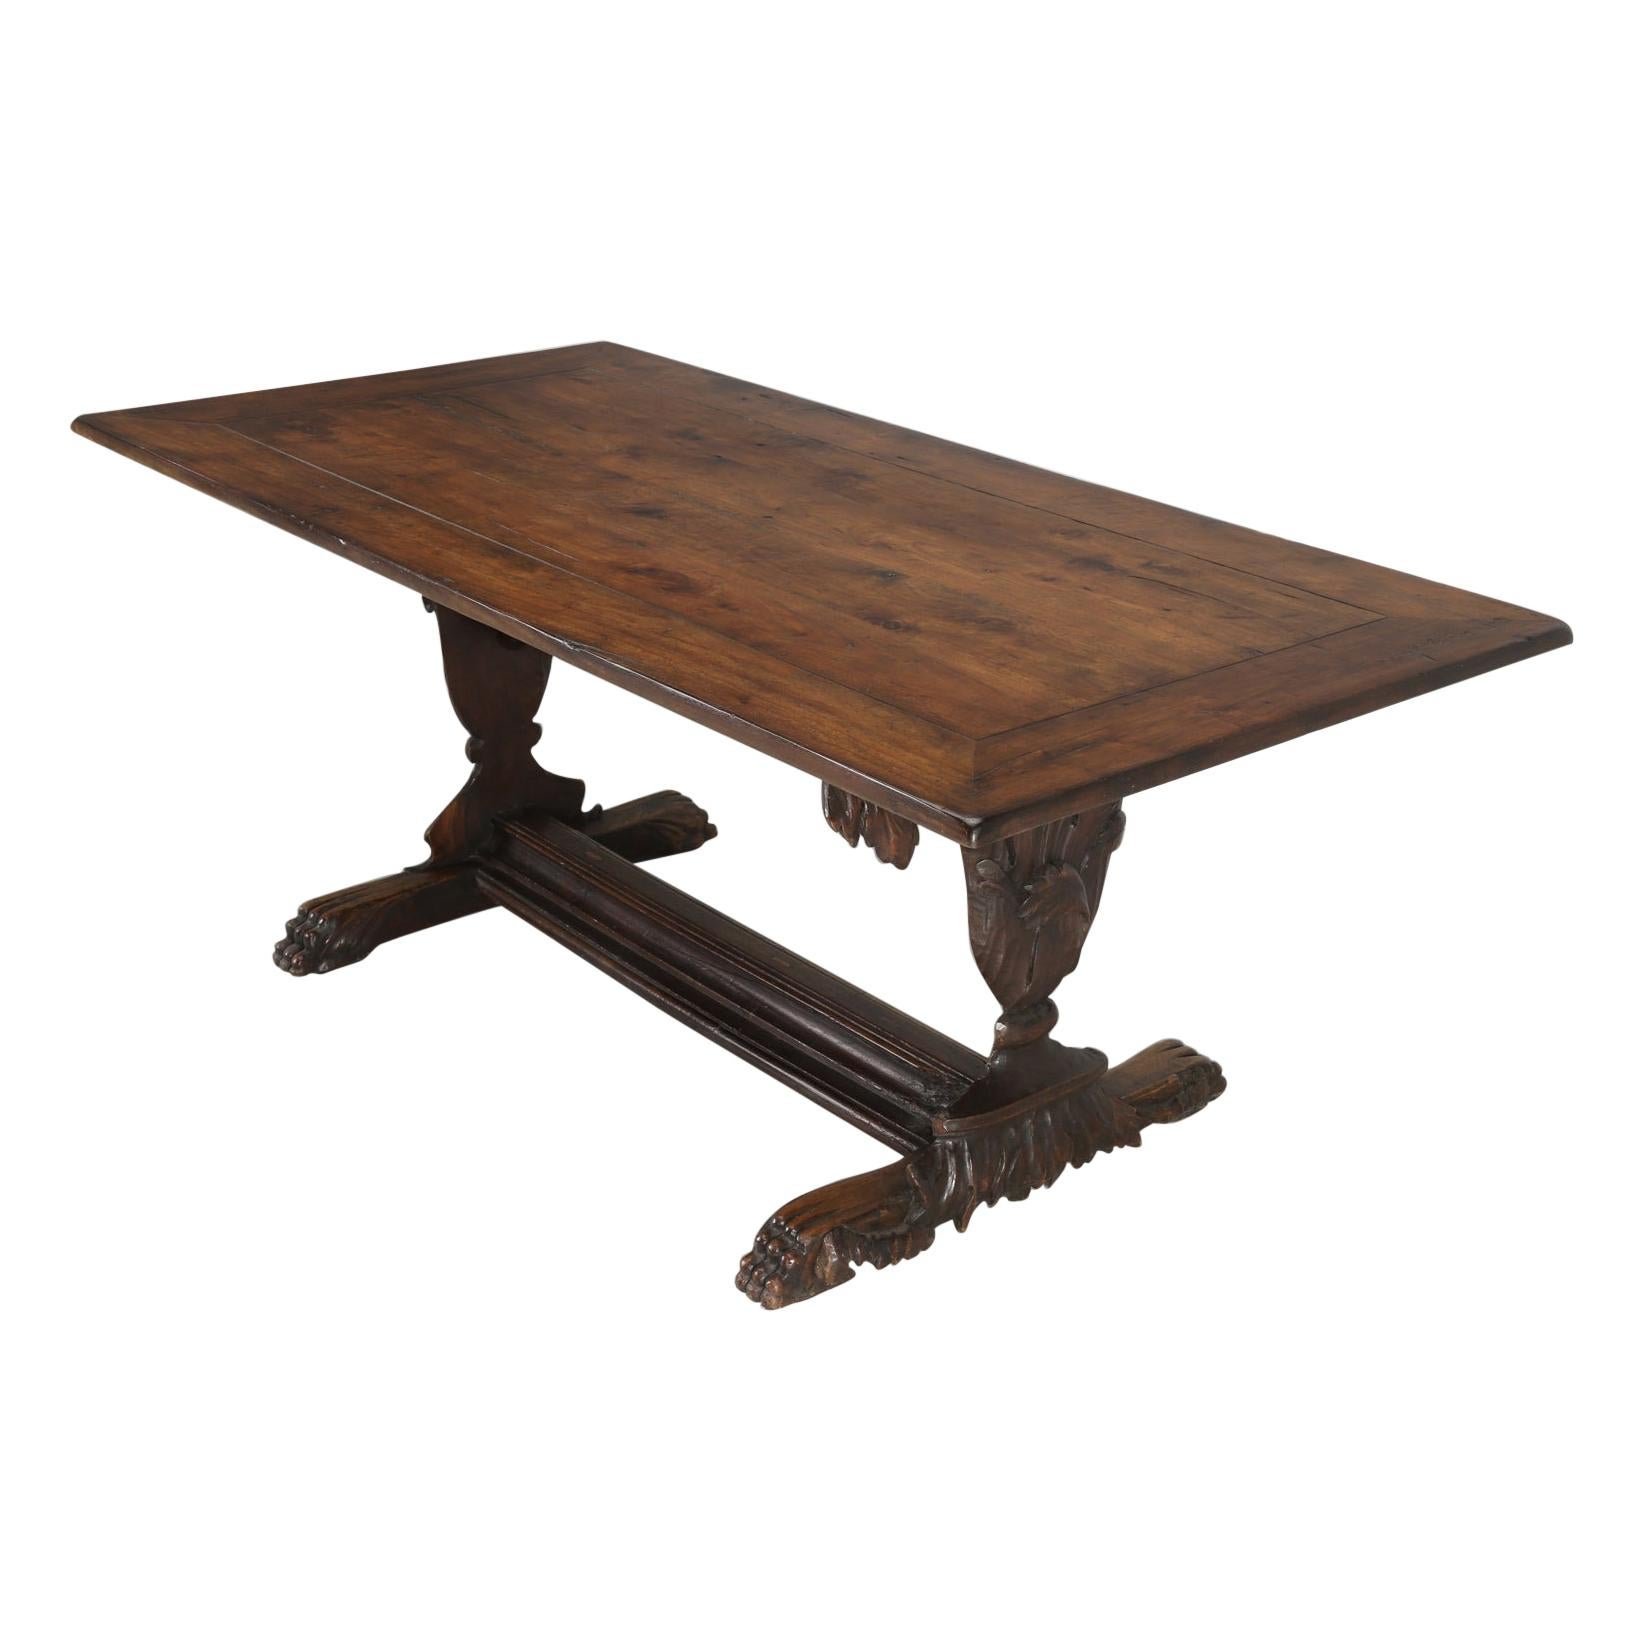 Antique French Hand Carved Solid Walnut Trestle Dining Table Restored in House